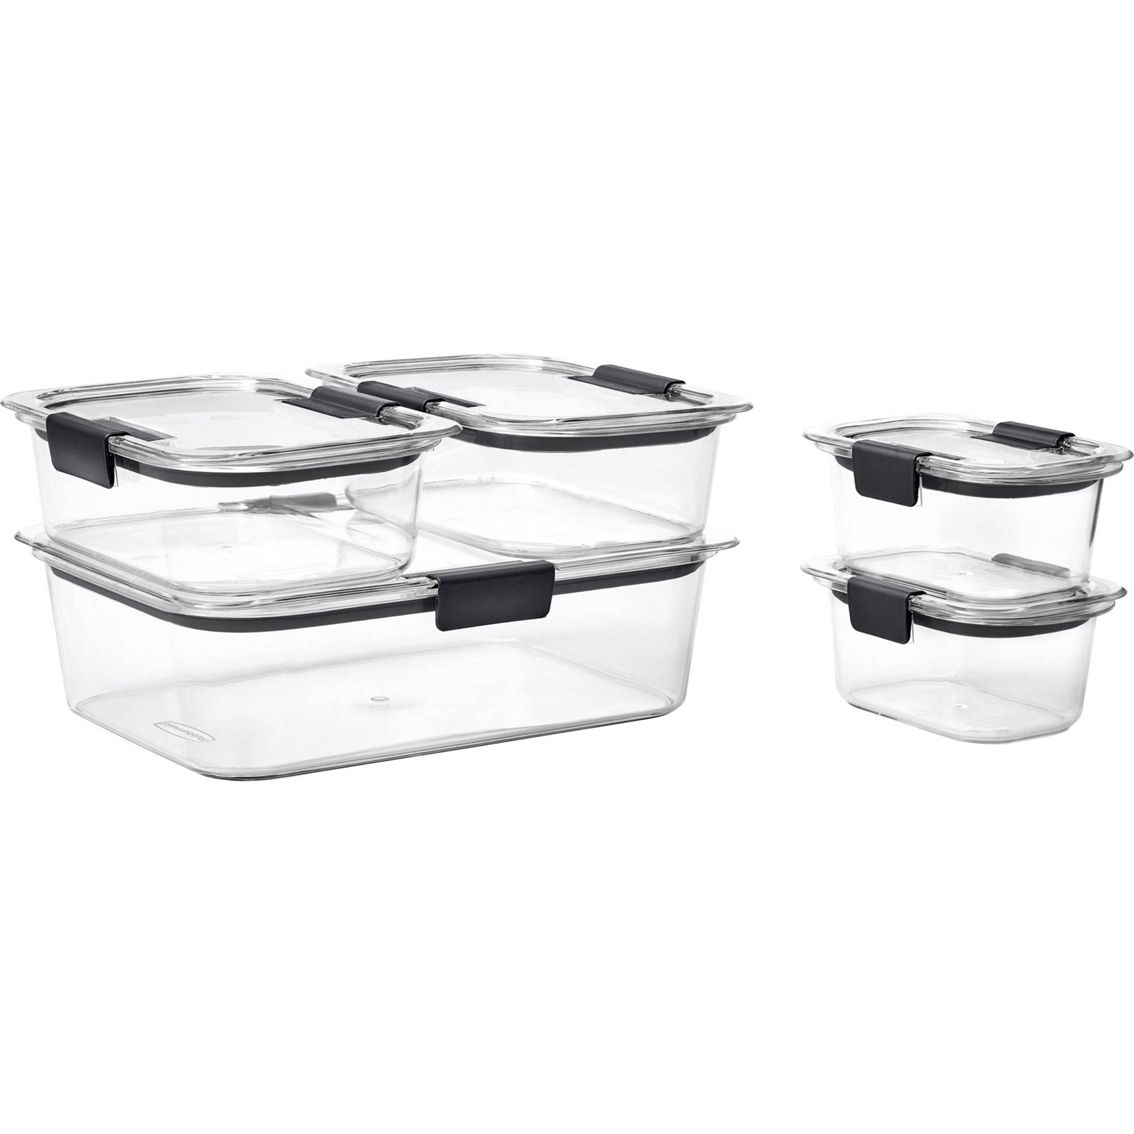 Rubbermaid Brilliance Food Storage 10 pc. Container Set - Image 2 of 3